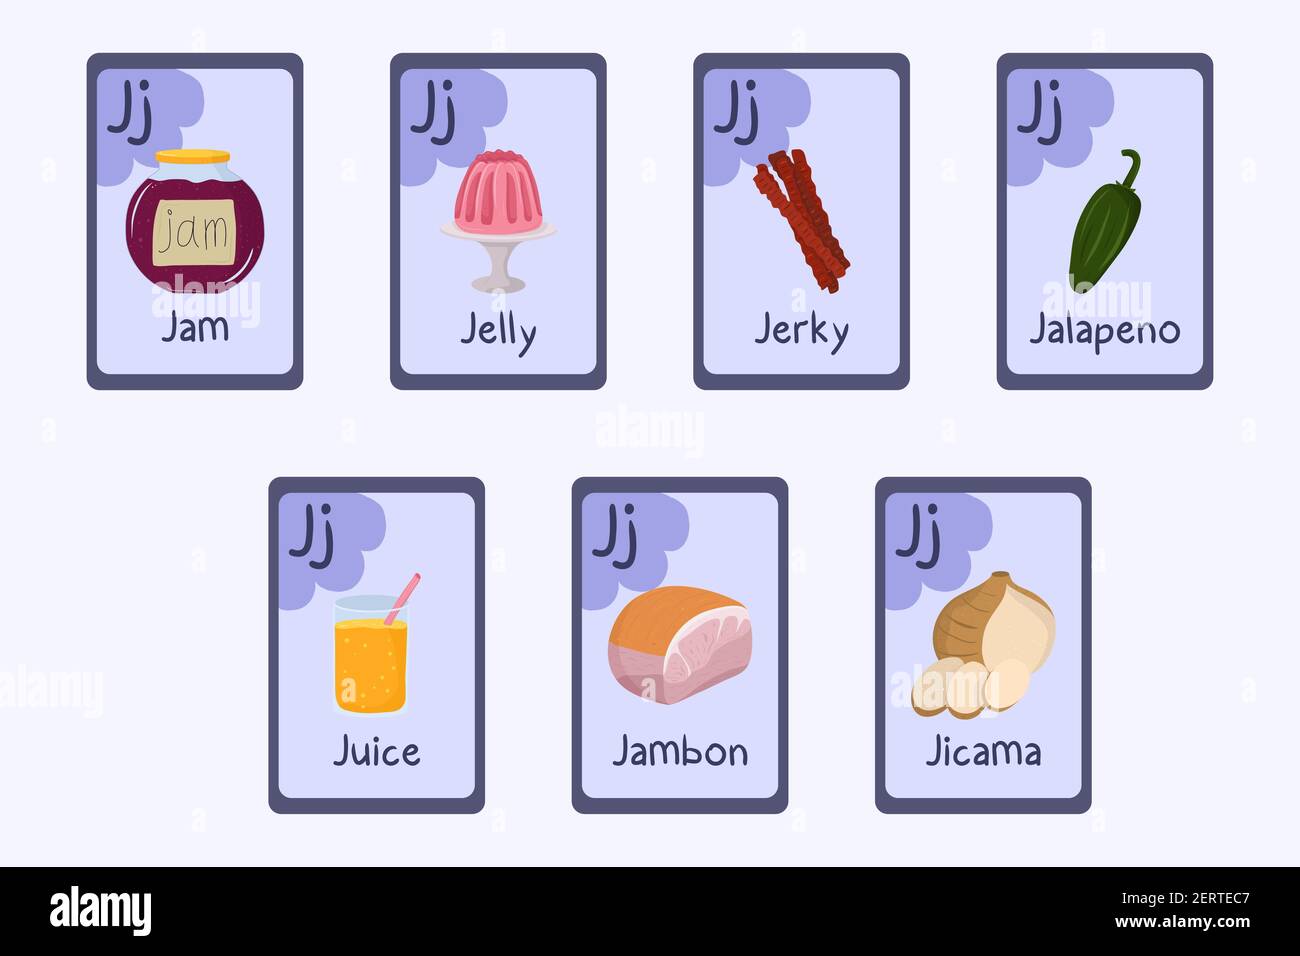 Colorful Phonics flashcard Letter J- jam, jelly, jerky, jalapeno, juice, jambon, jicama. Food themed ABC cards for teaching reading with foods, vegetables, fruits and nuts. Series of ABC. Stock Vector